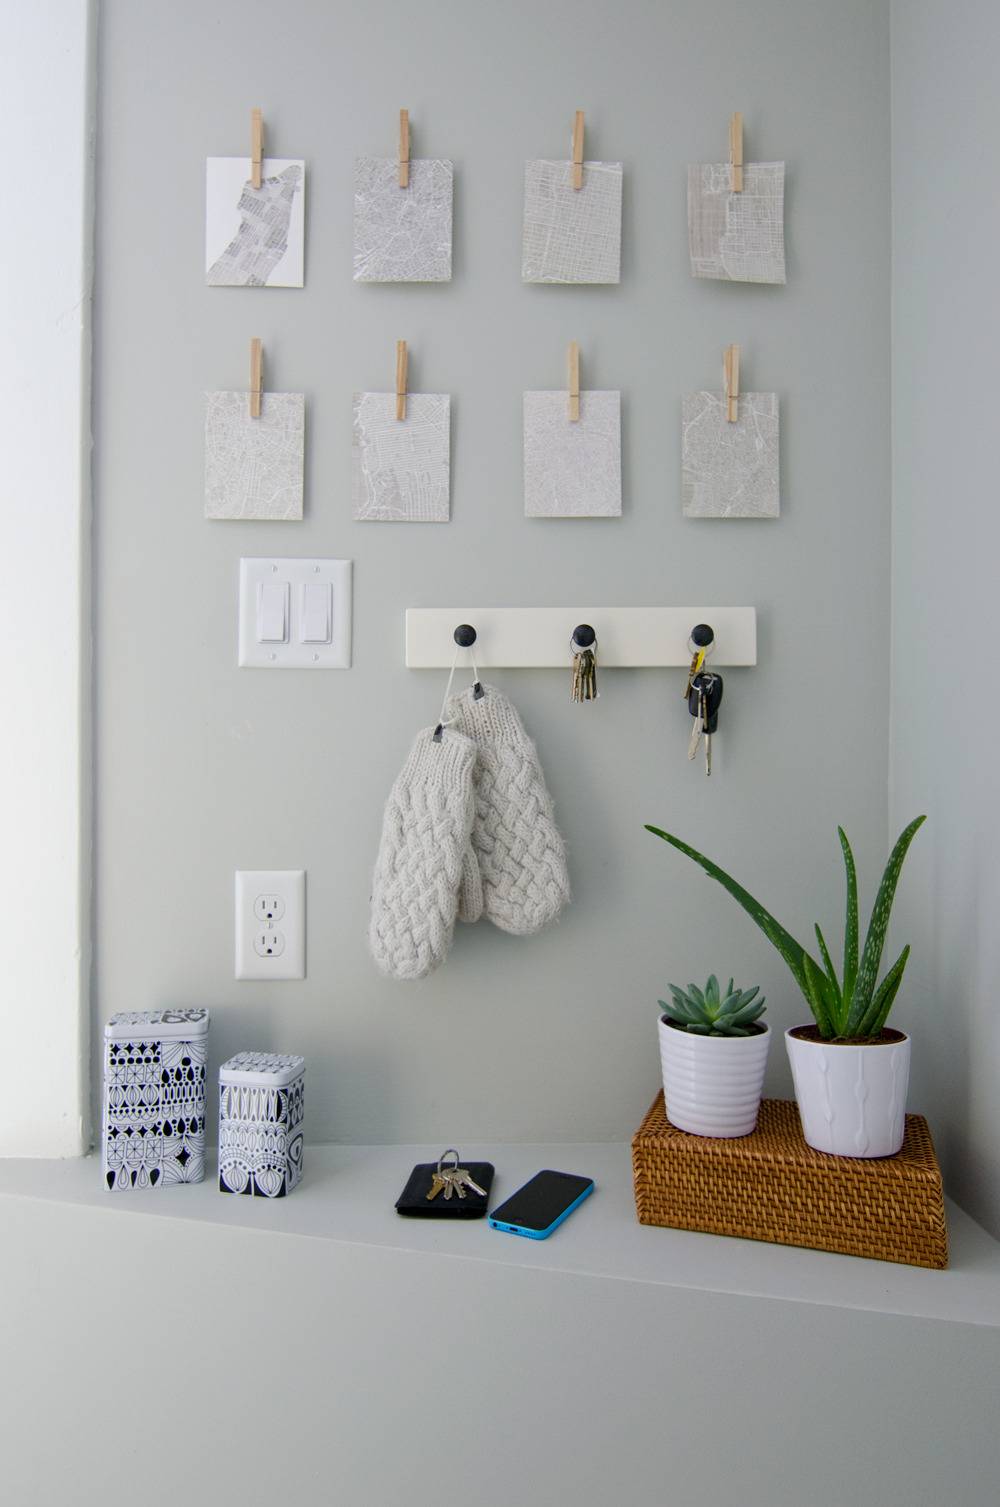 An entryway with wall hangings and potted plants.